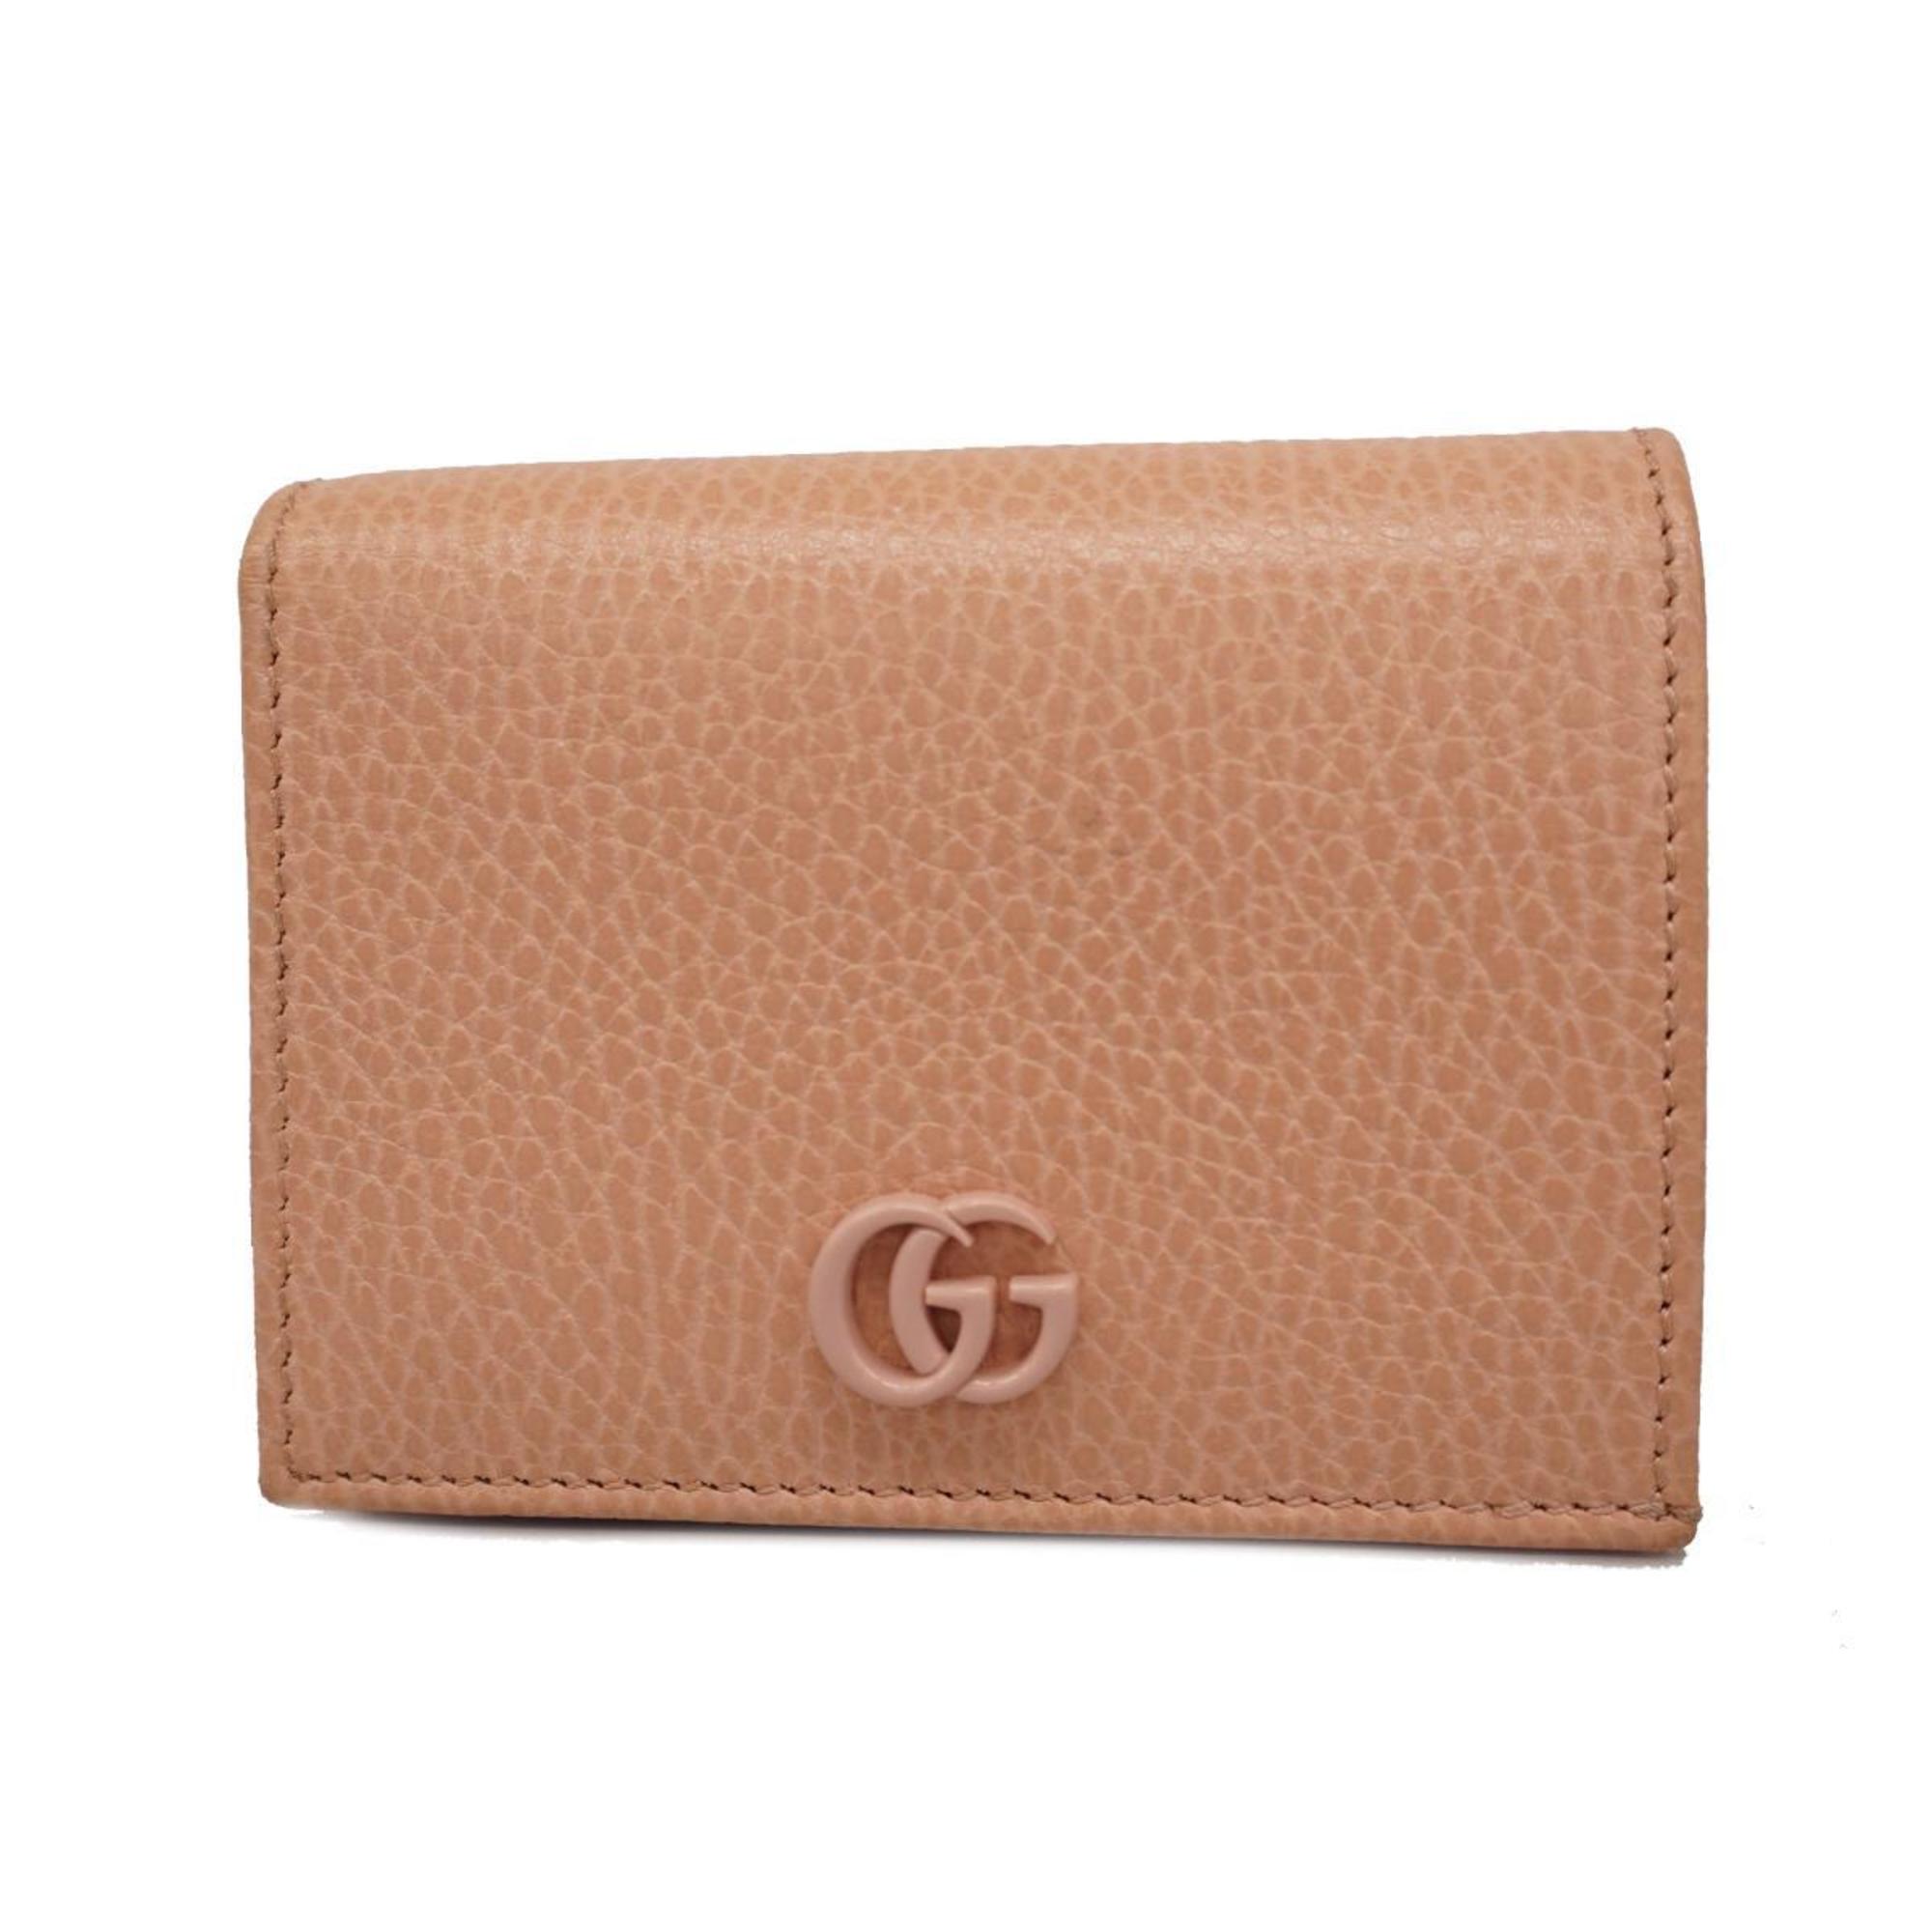 Gucci Wallet GG Marmont 456126 Leather Pink Women's